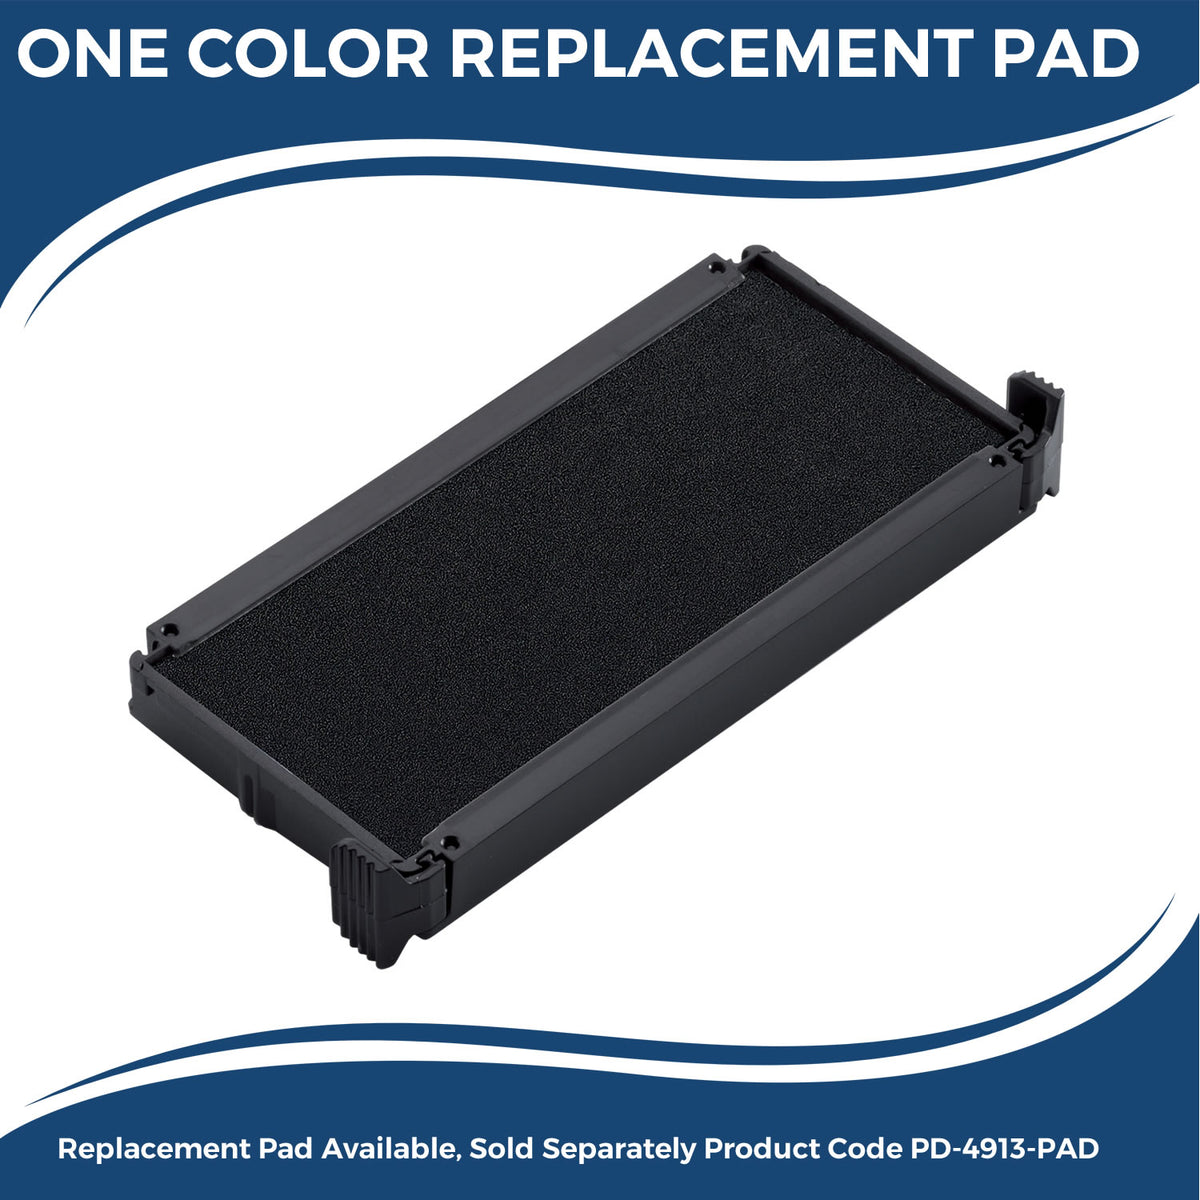 Large Self-Inking Courtesy Copy Original Filed Electronically Stamp 4853S Large Replacment Pad